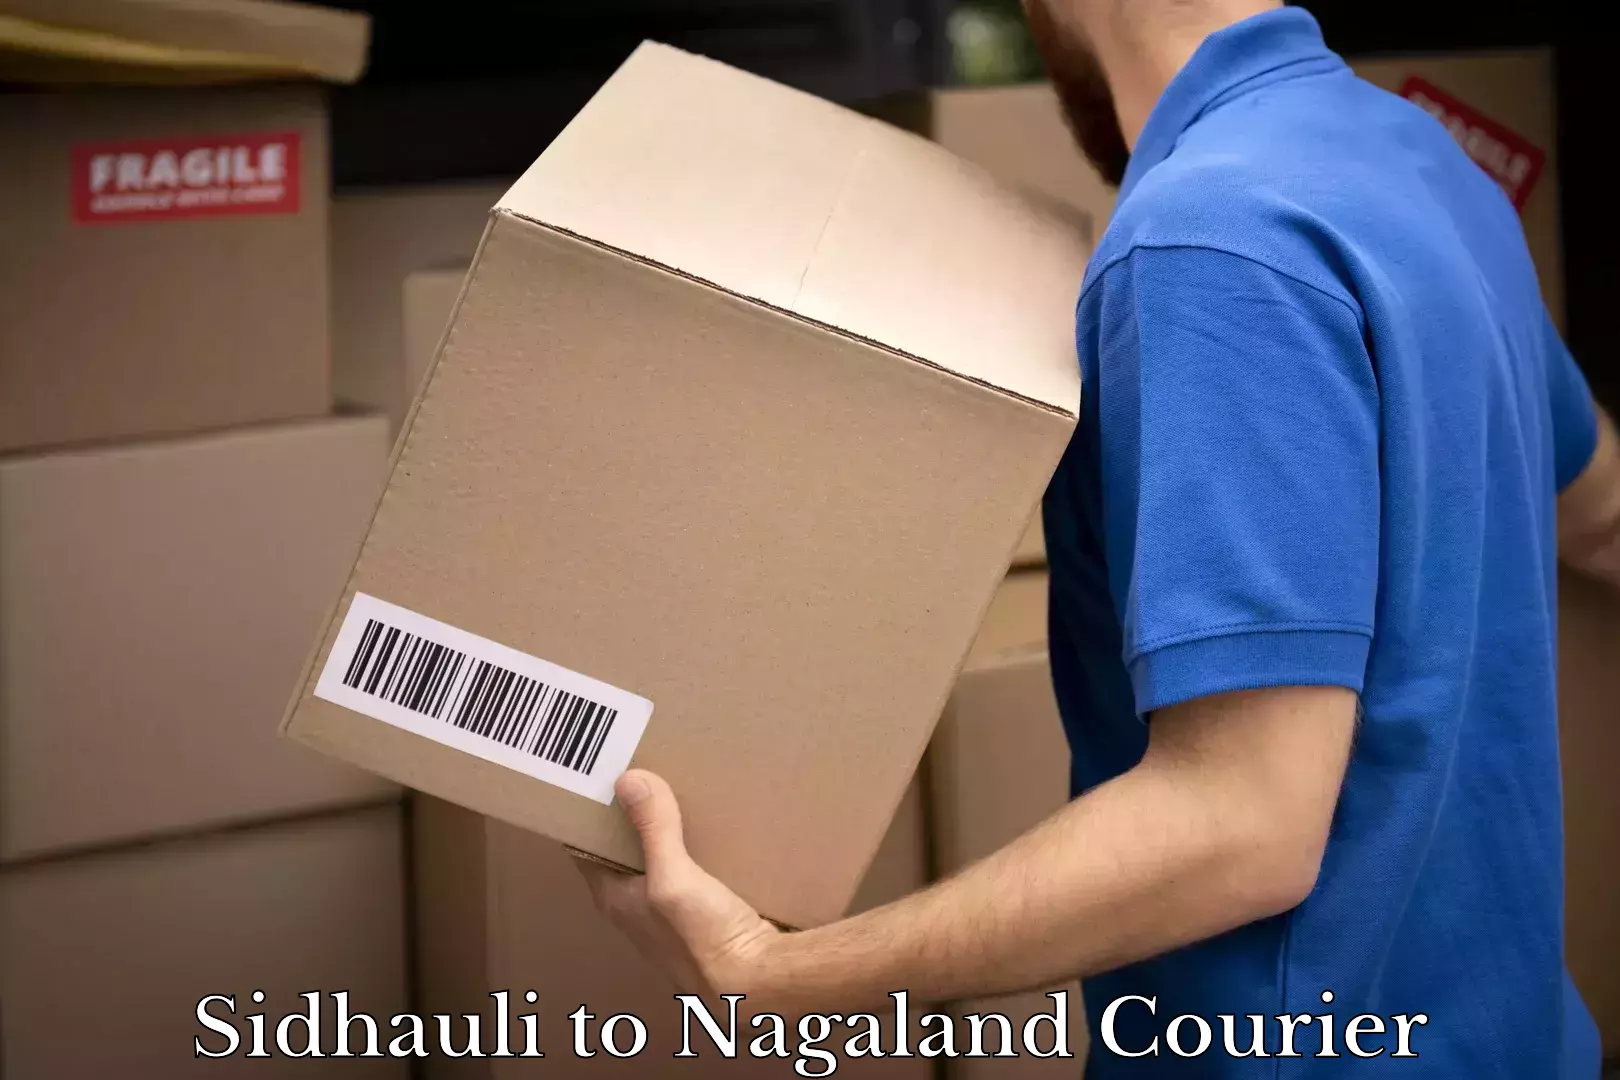 Overnight delivery services Sidhauli to Nagaland